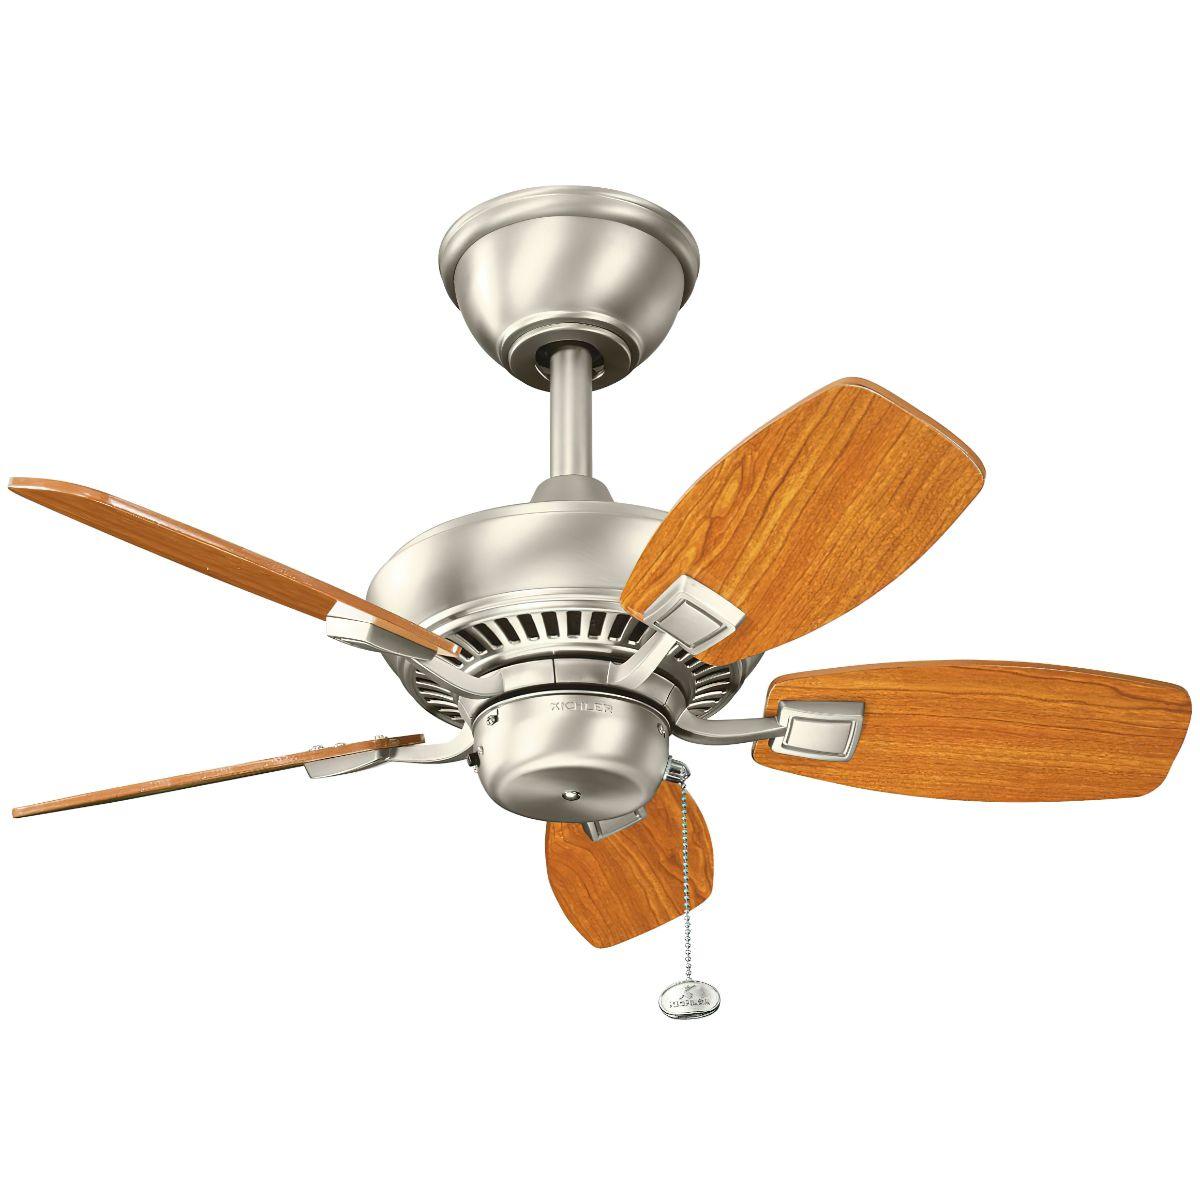 Canfield 30 Inch Outdoor Ceiling Fan With Pull Chain